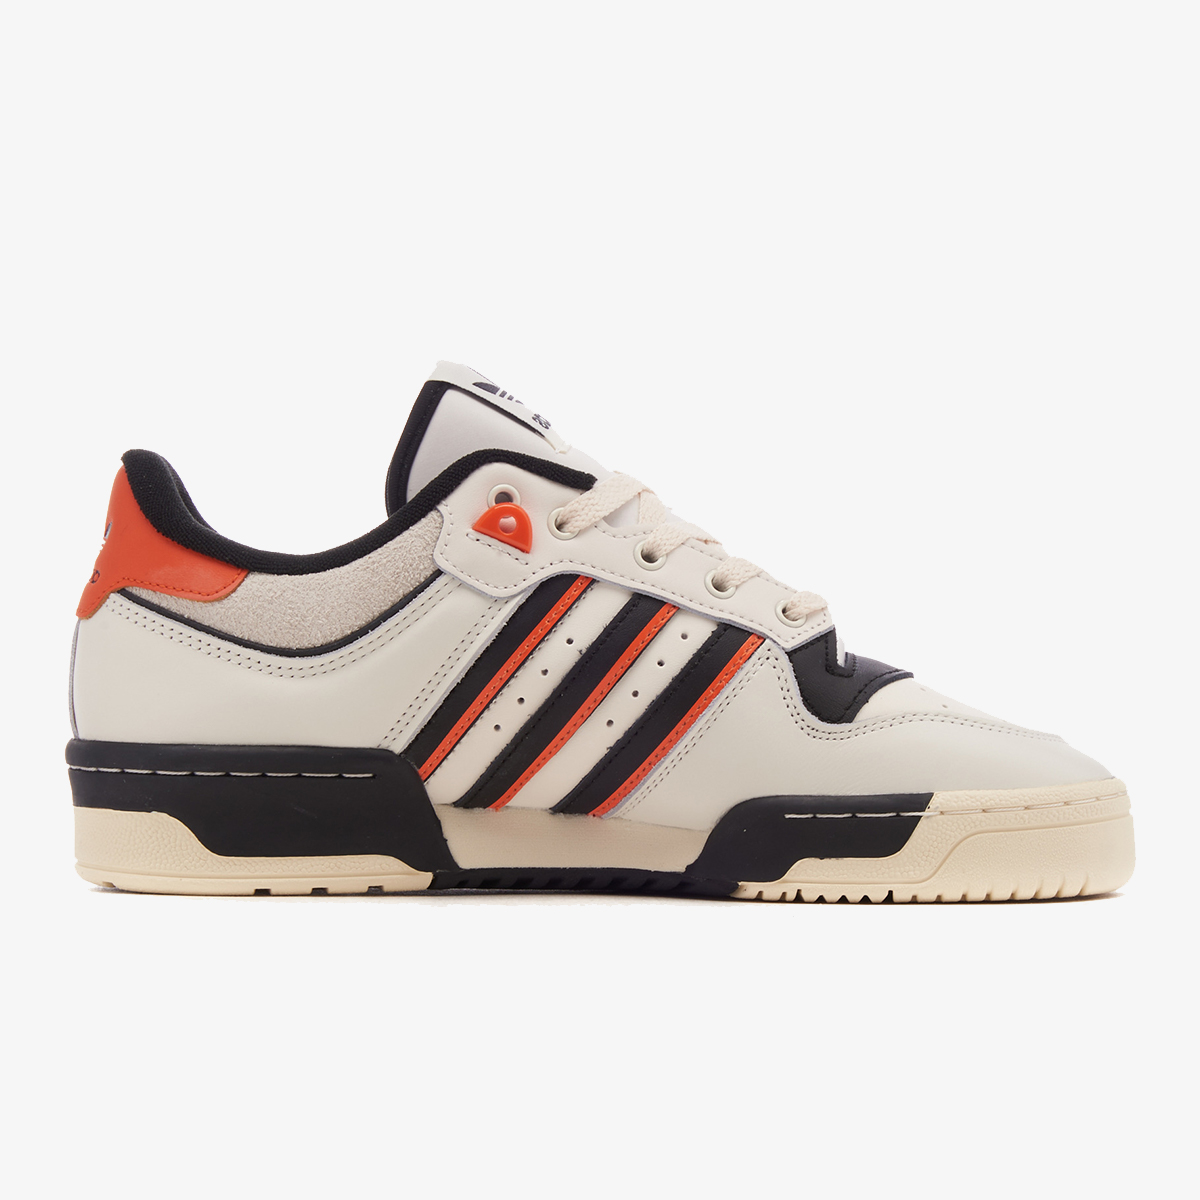 ADIDAS Superge RIVALRY 86 LOW 